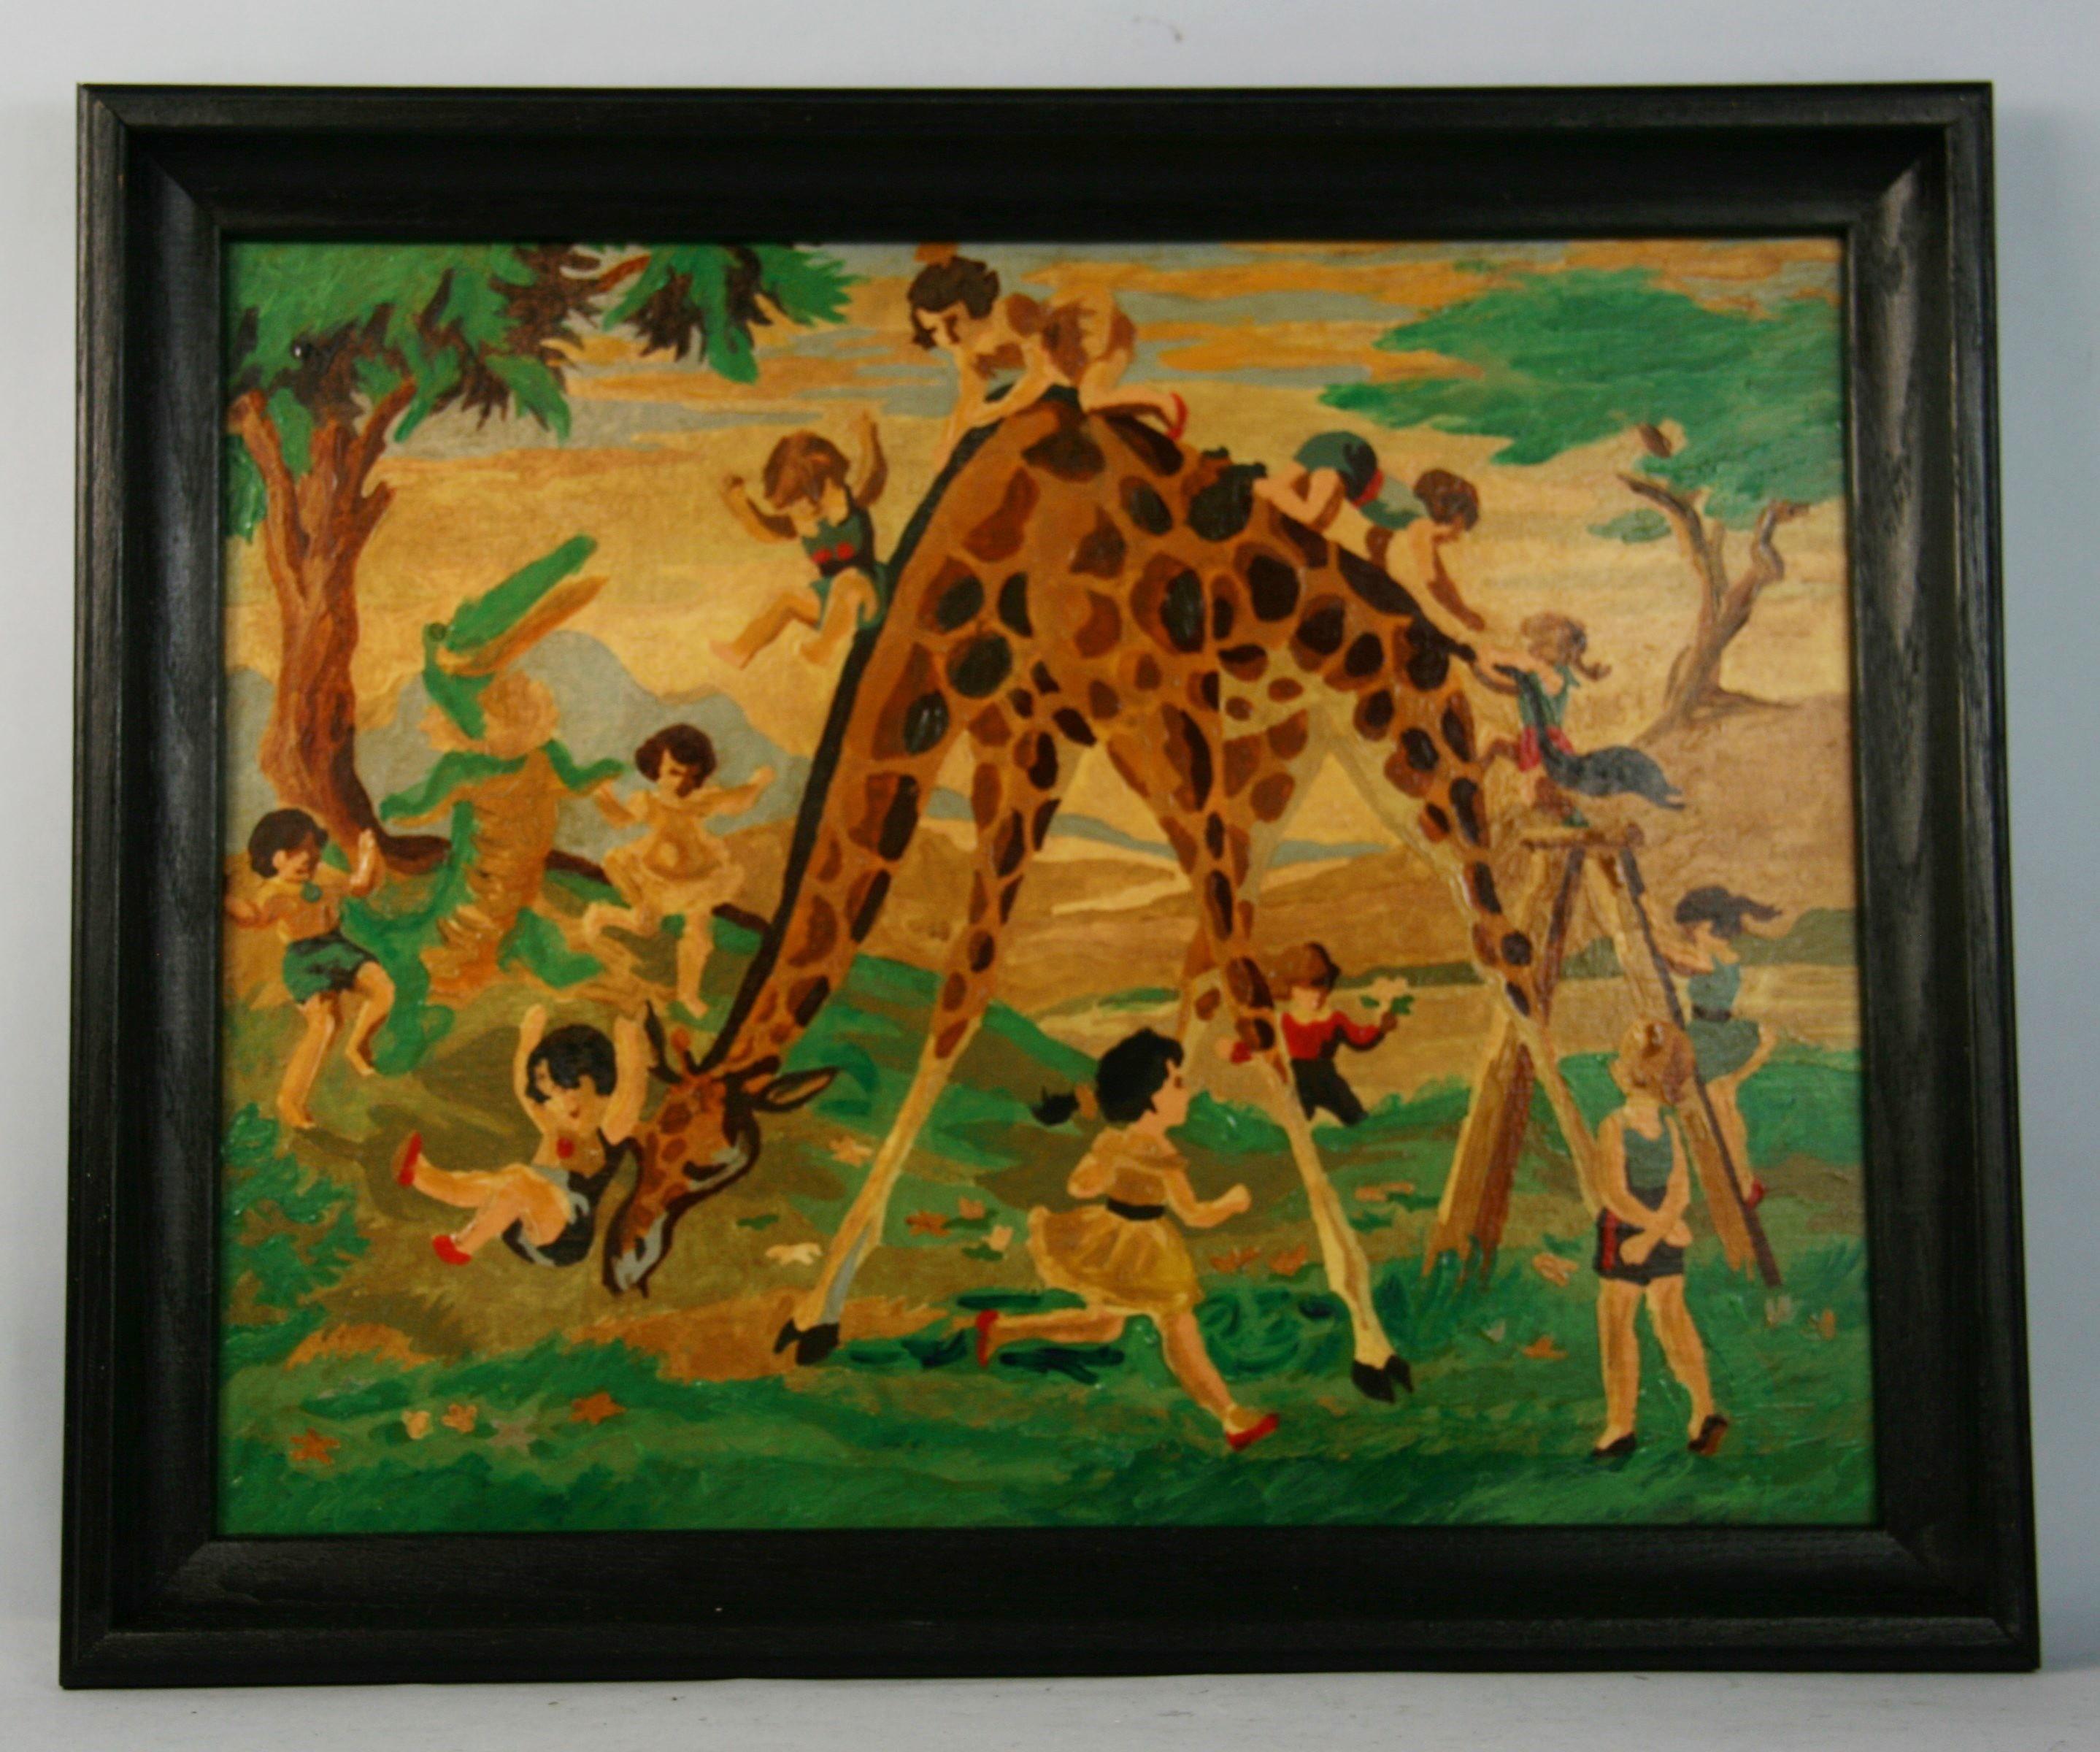 3982 Children riding a giraffe oil on board set in a painted oak frame
Image size 15.5x19.5